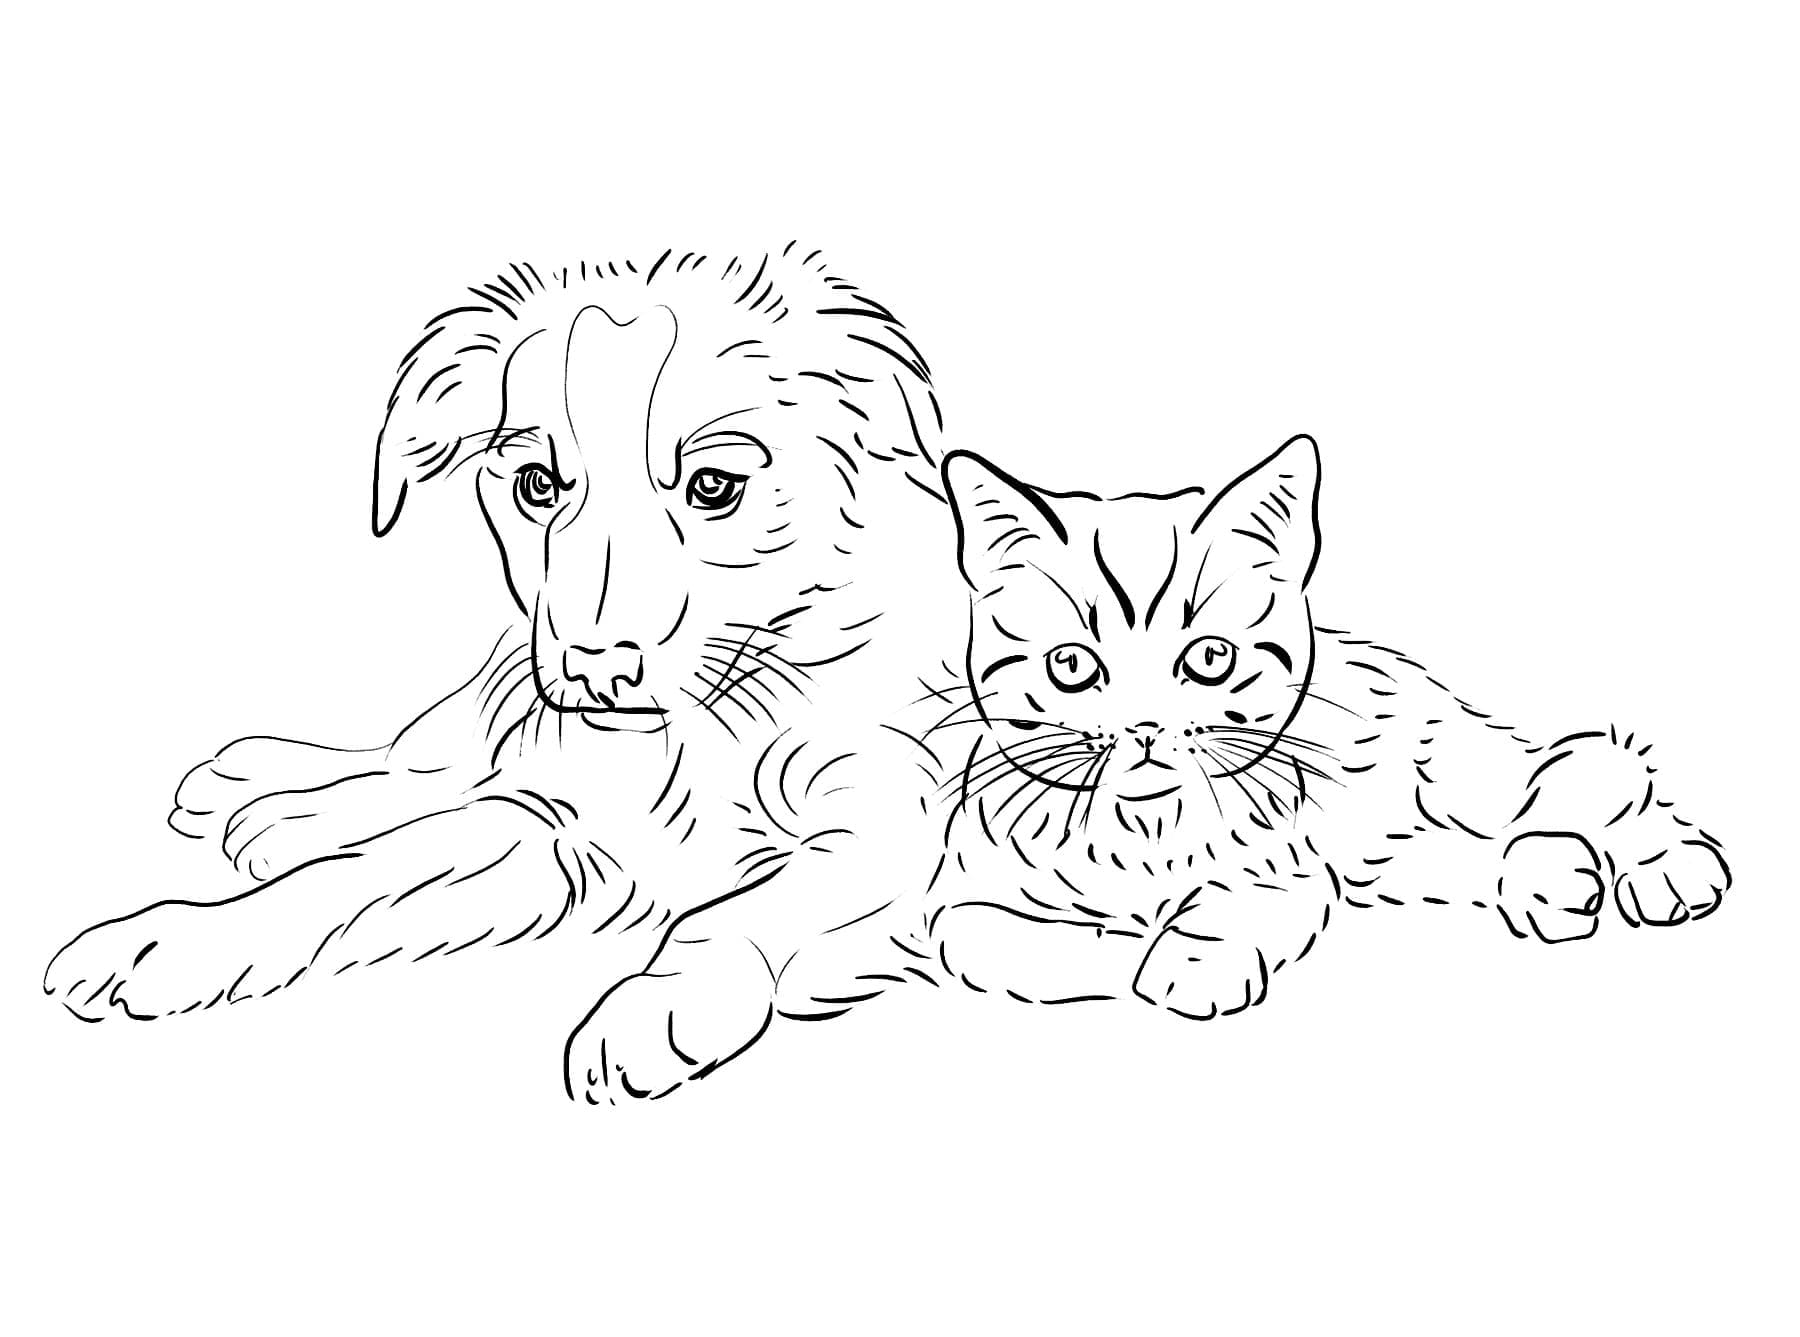 Cat and dog drawing for coloring page Free Printable! Nurieworld